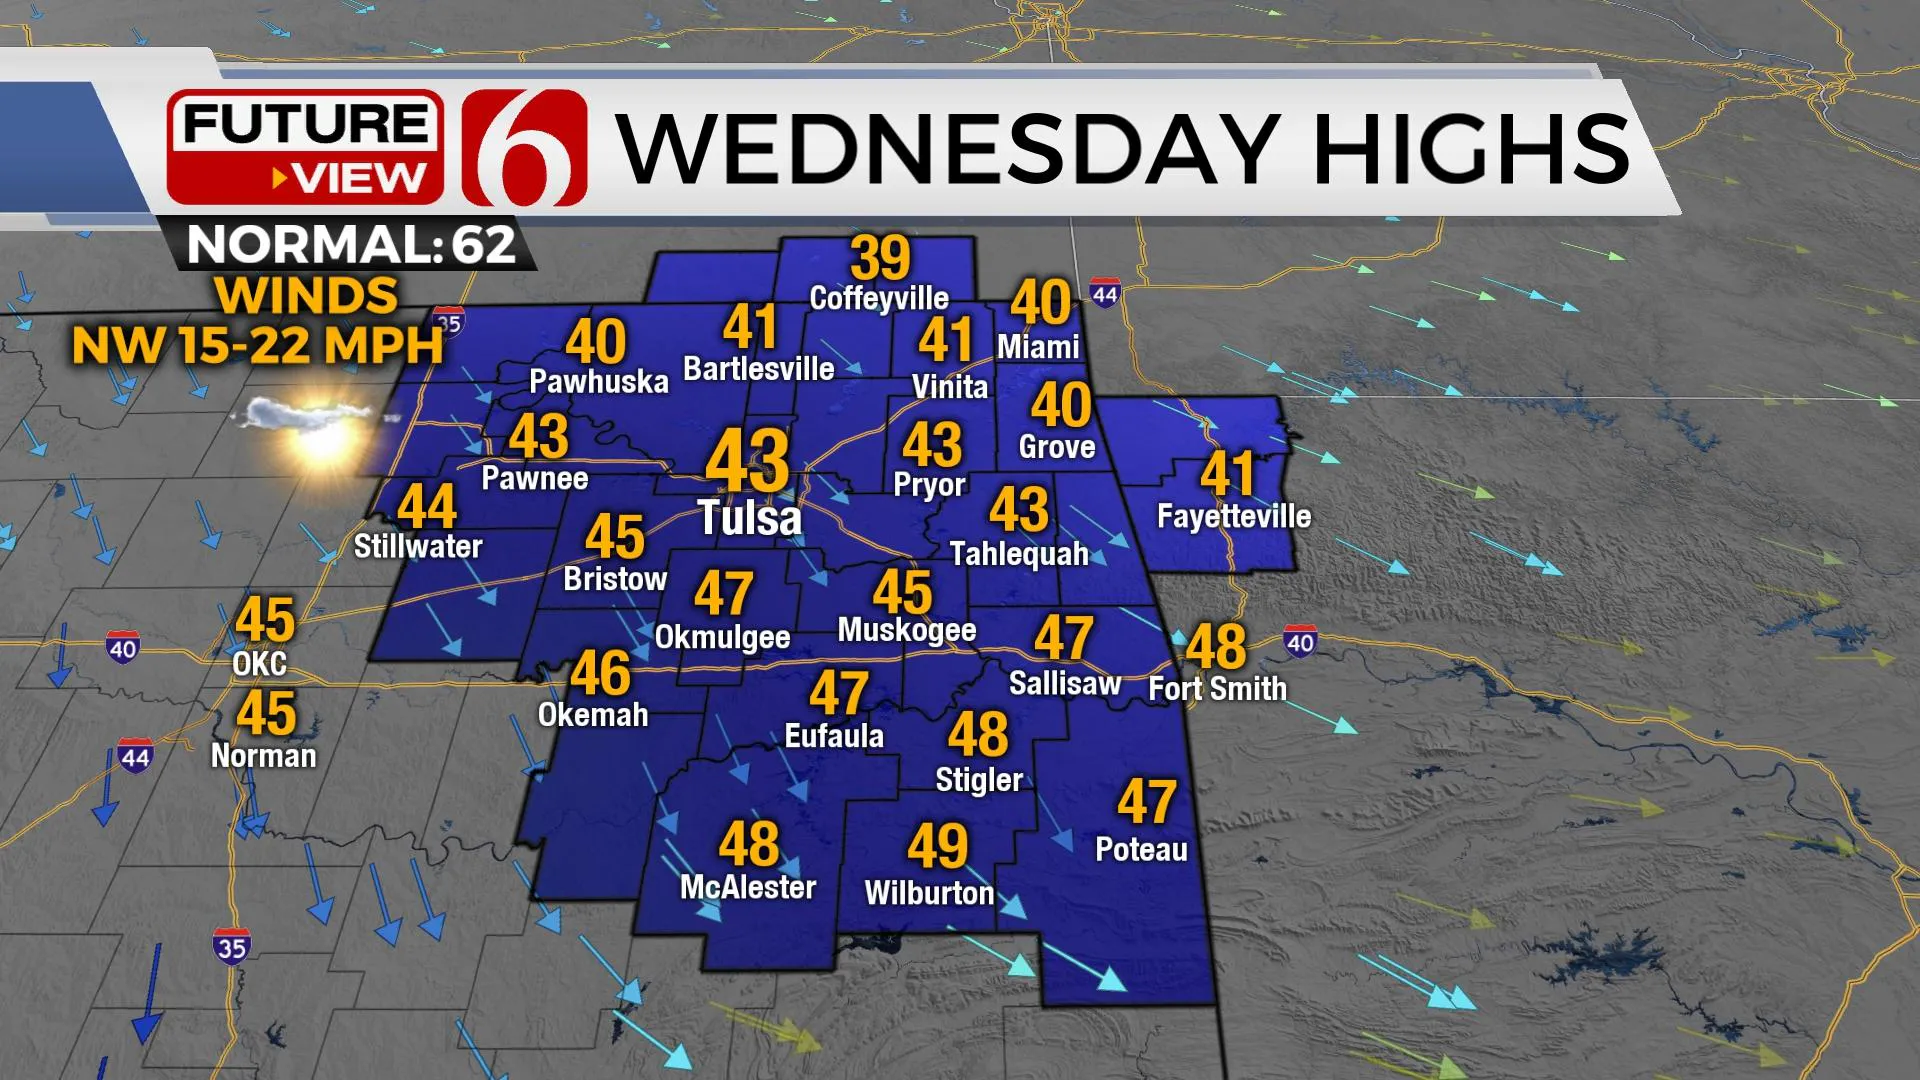 High temps on Wednesday.